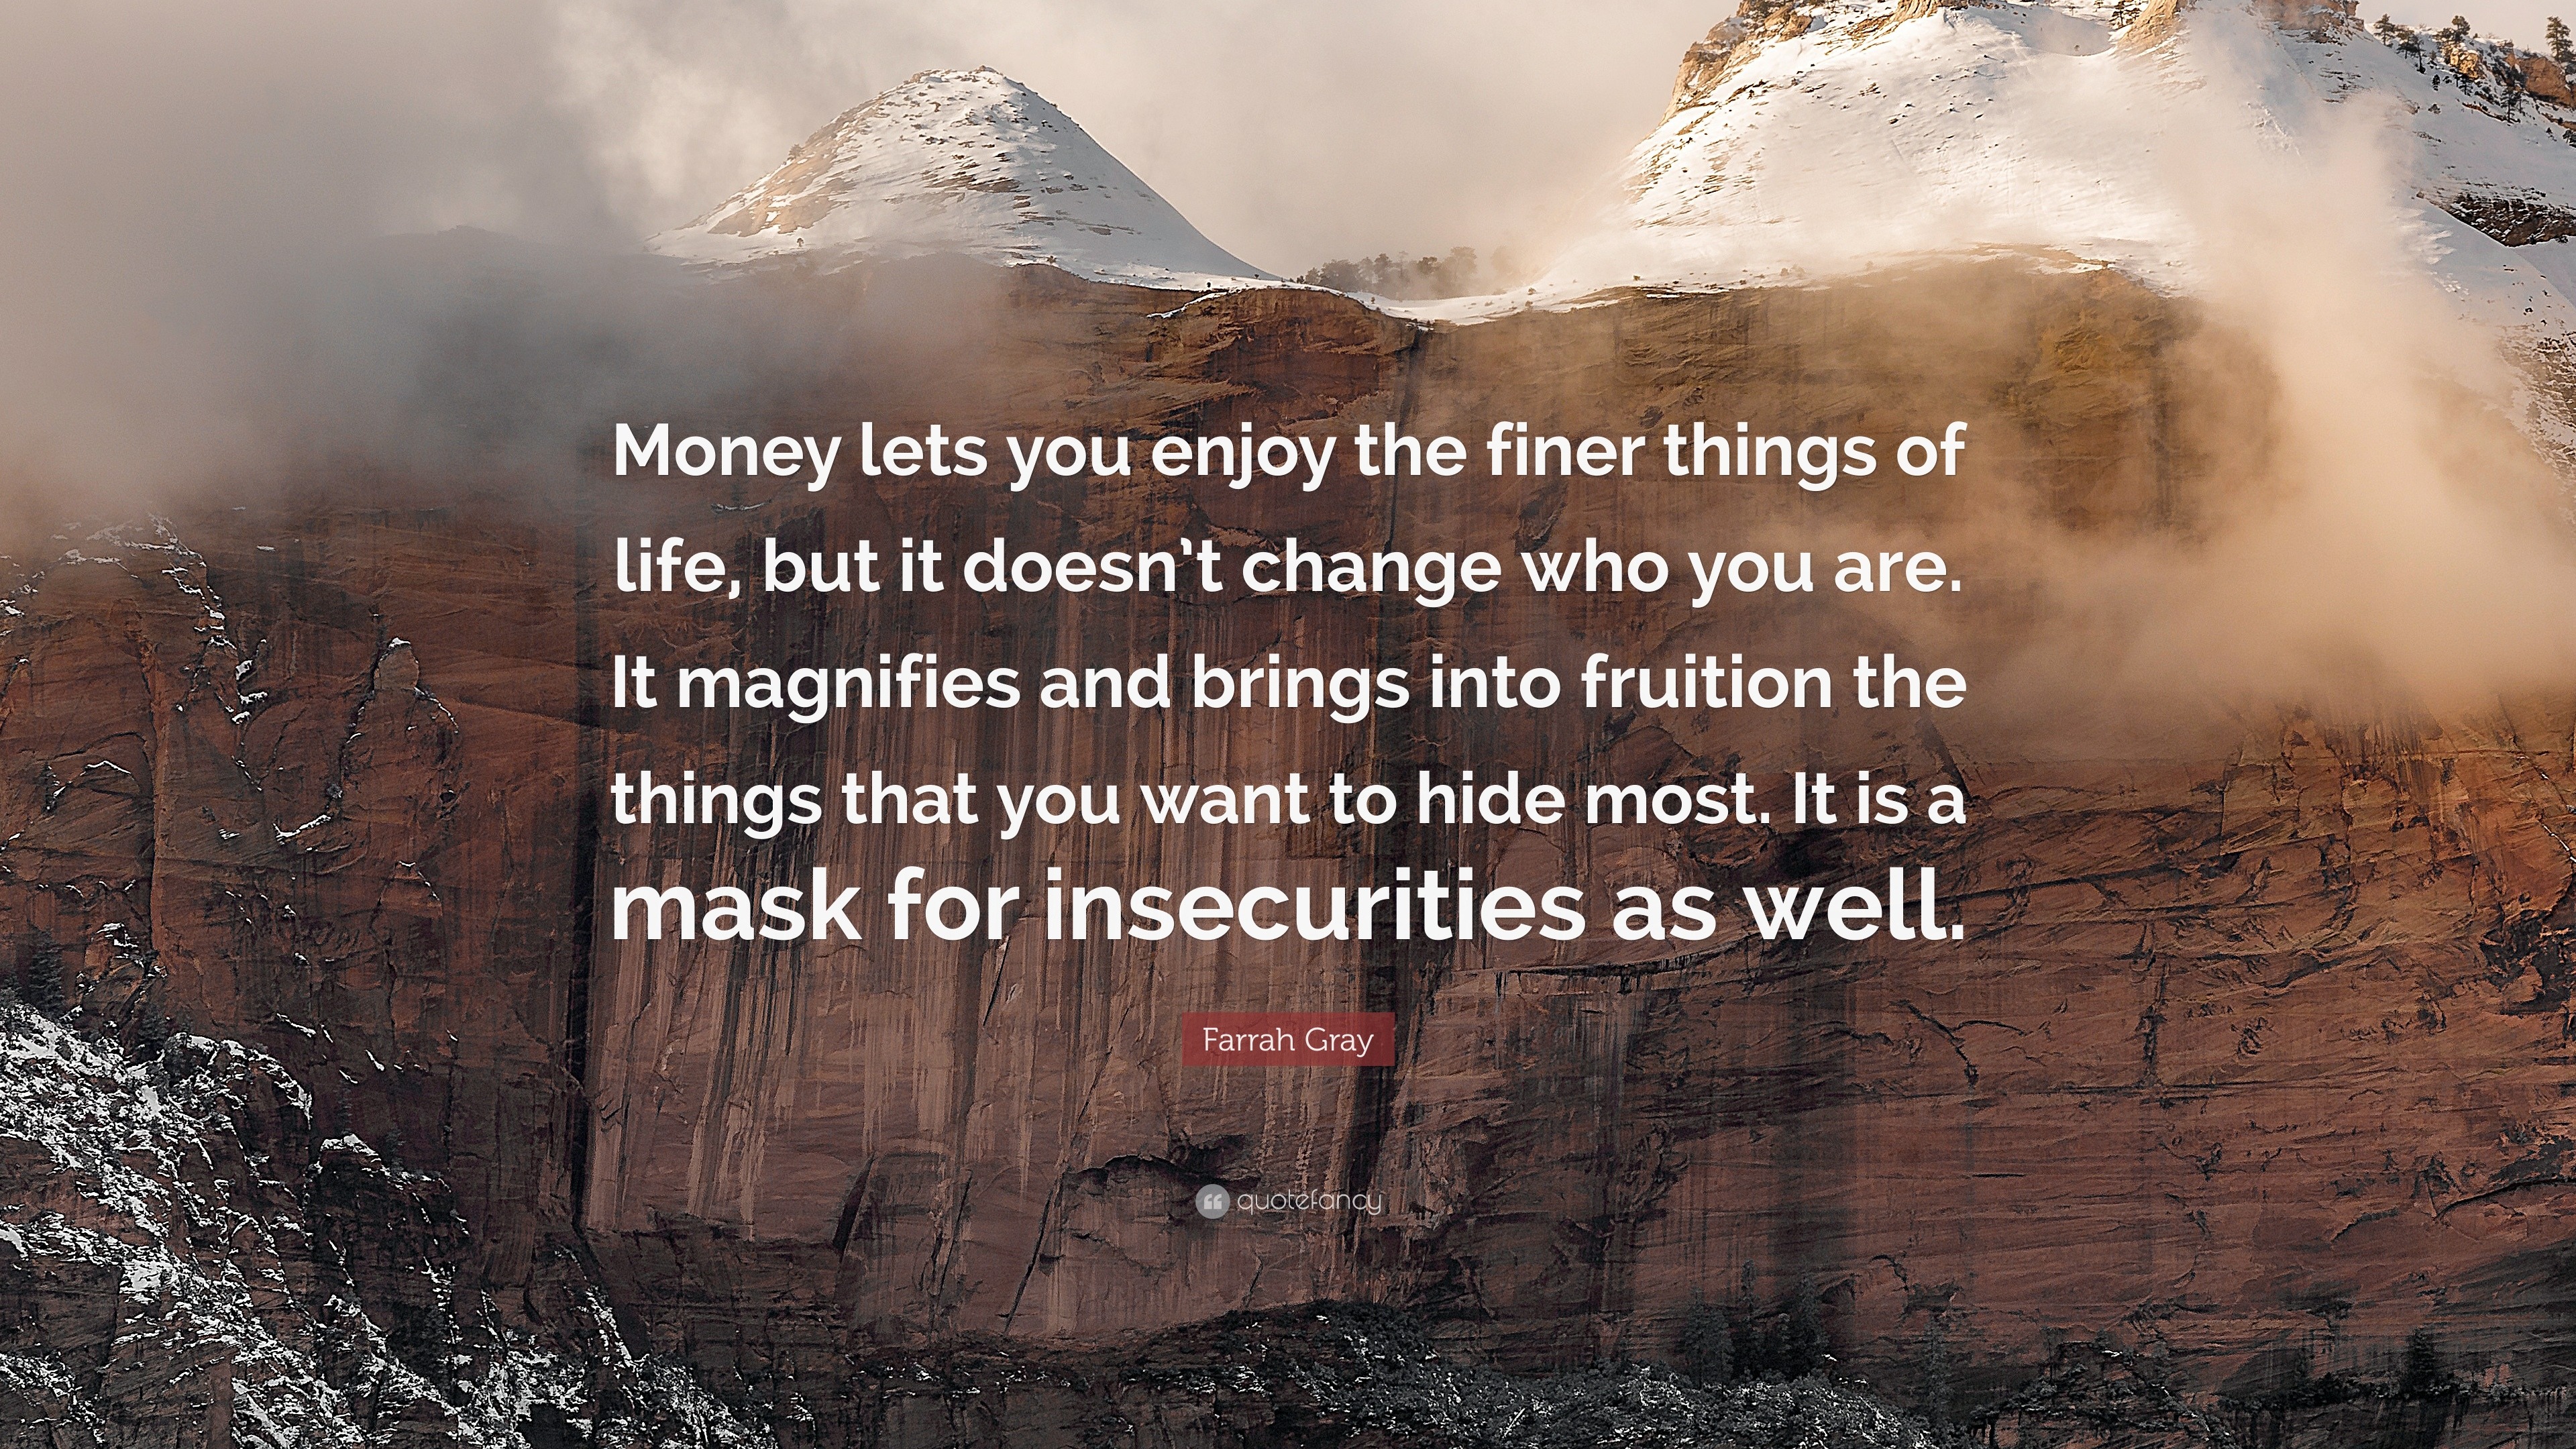 Farrah Gray Quote “Money lets you enjoy the finer things of life but